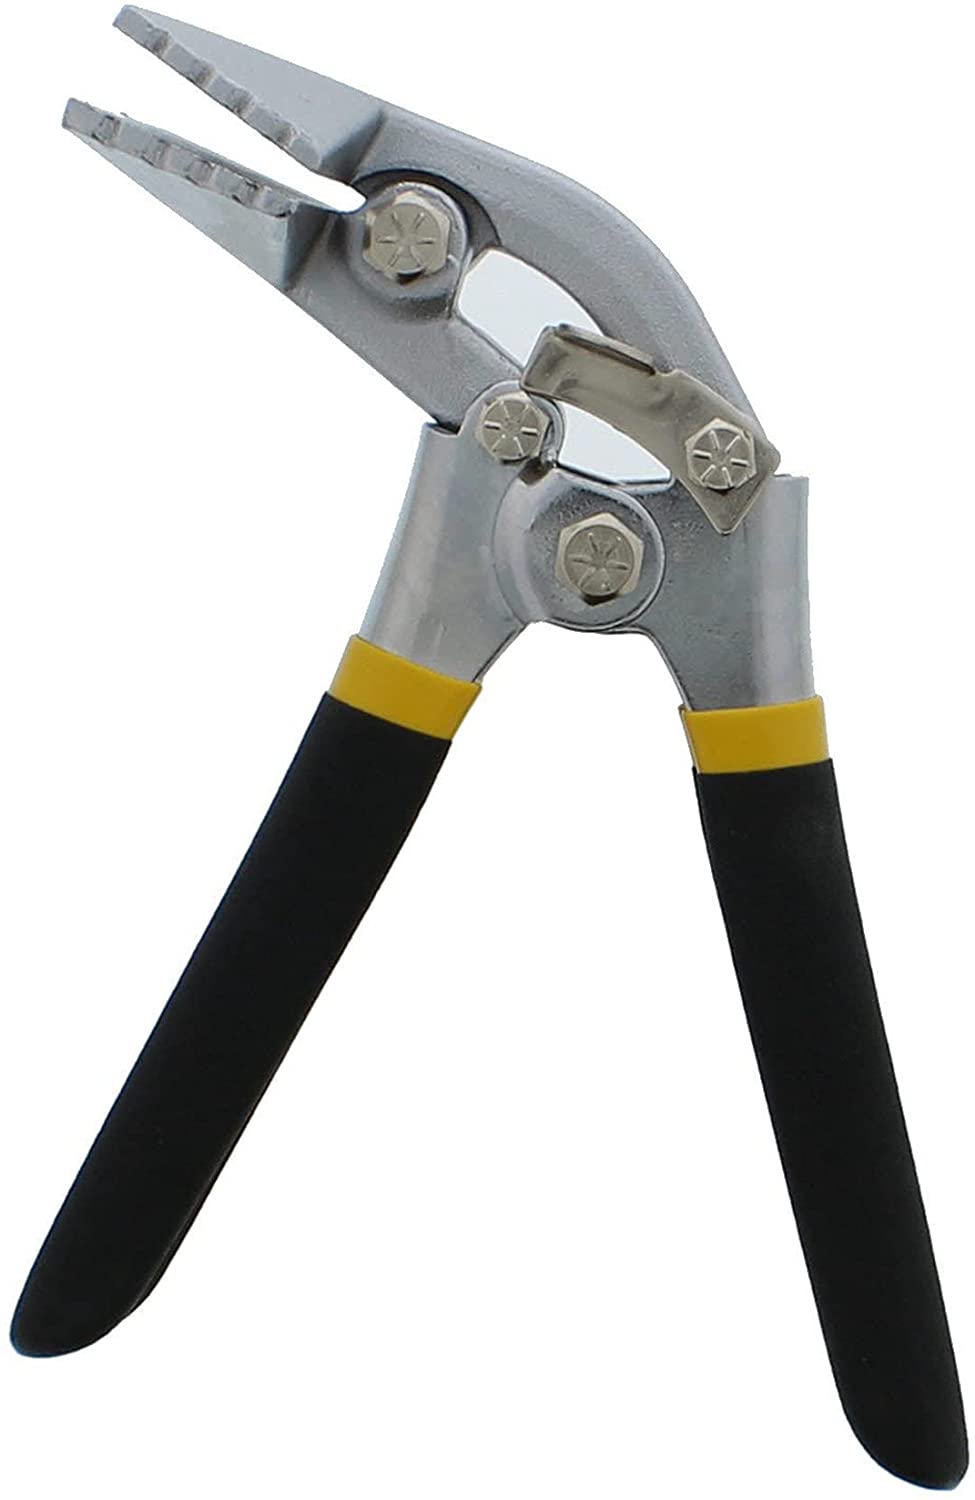 The heavy-duty all-steel tool is the Perma Cover High Quality Sheet Metal Hand Seamers - Multiple Sizes Available with a silver appearance, black handles, and yellow accents near the grip. It features an angled jaw with three teeth-like protrusions on one side and a solid jaw on the other, ideal for gripping, bending, seaming, or flattening tasks.